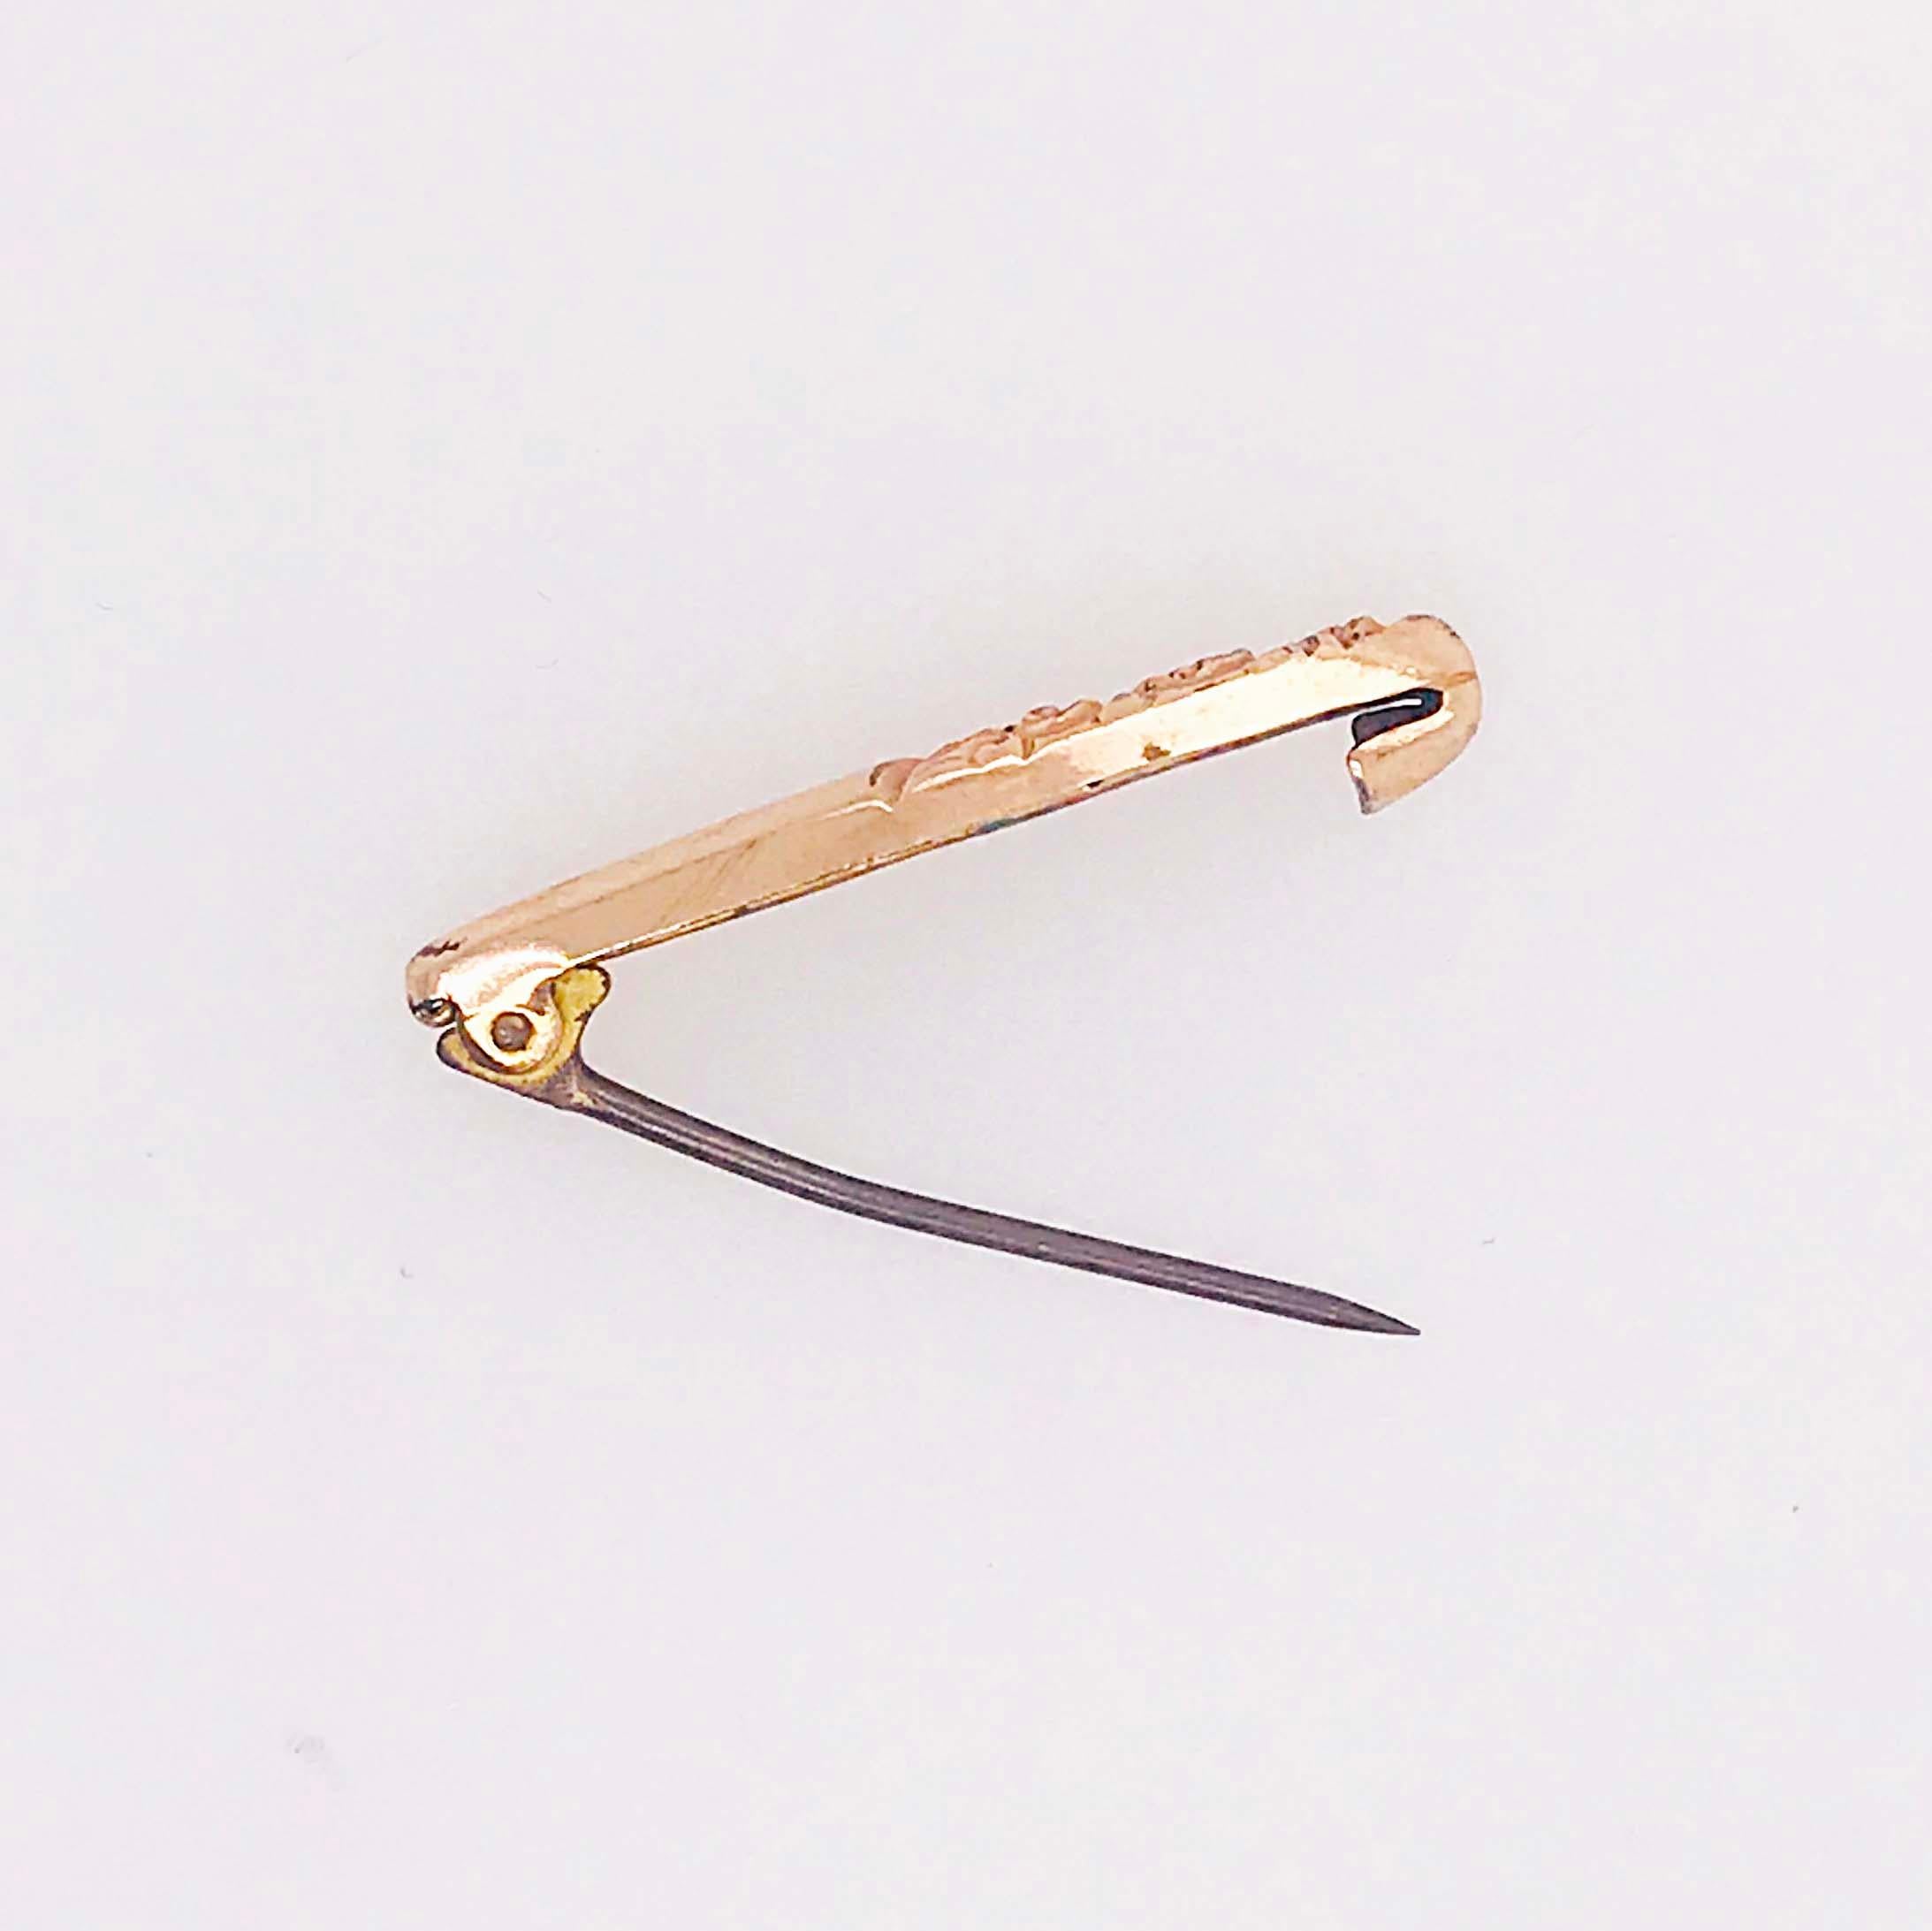 Rose Scroll Pin, Scroll, Rose Gold Brooch with Hand Engraving, circa 1910 1